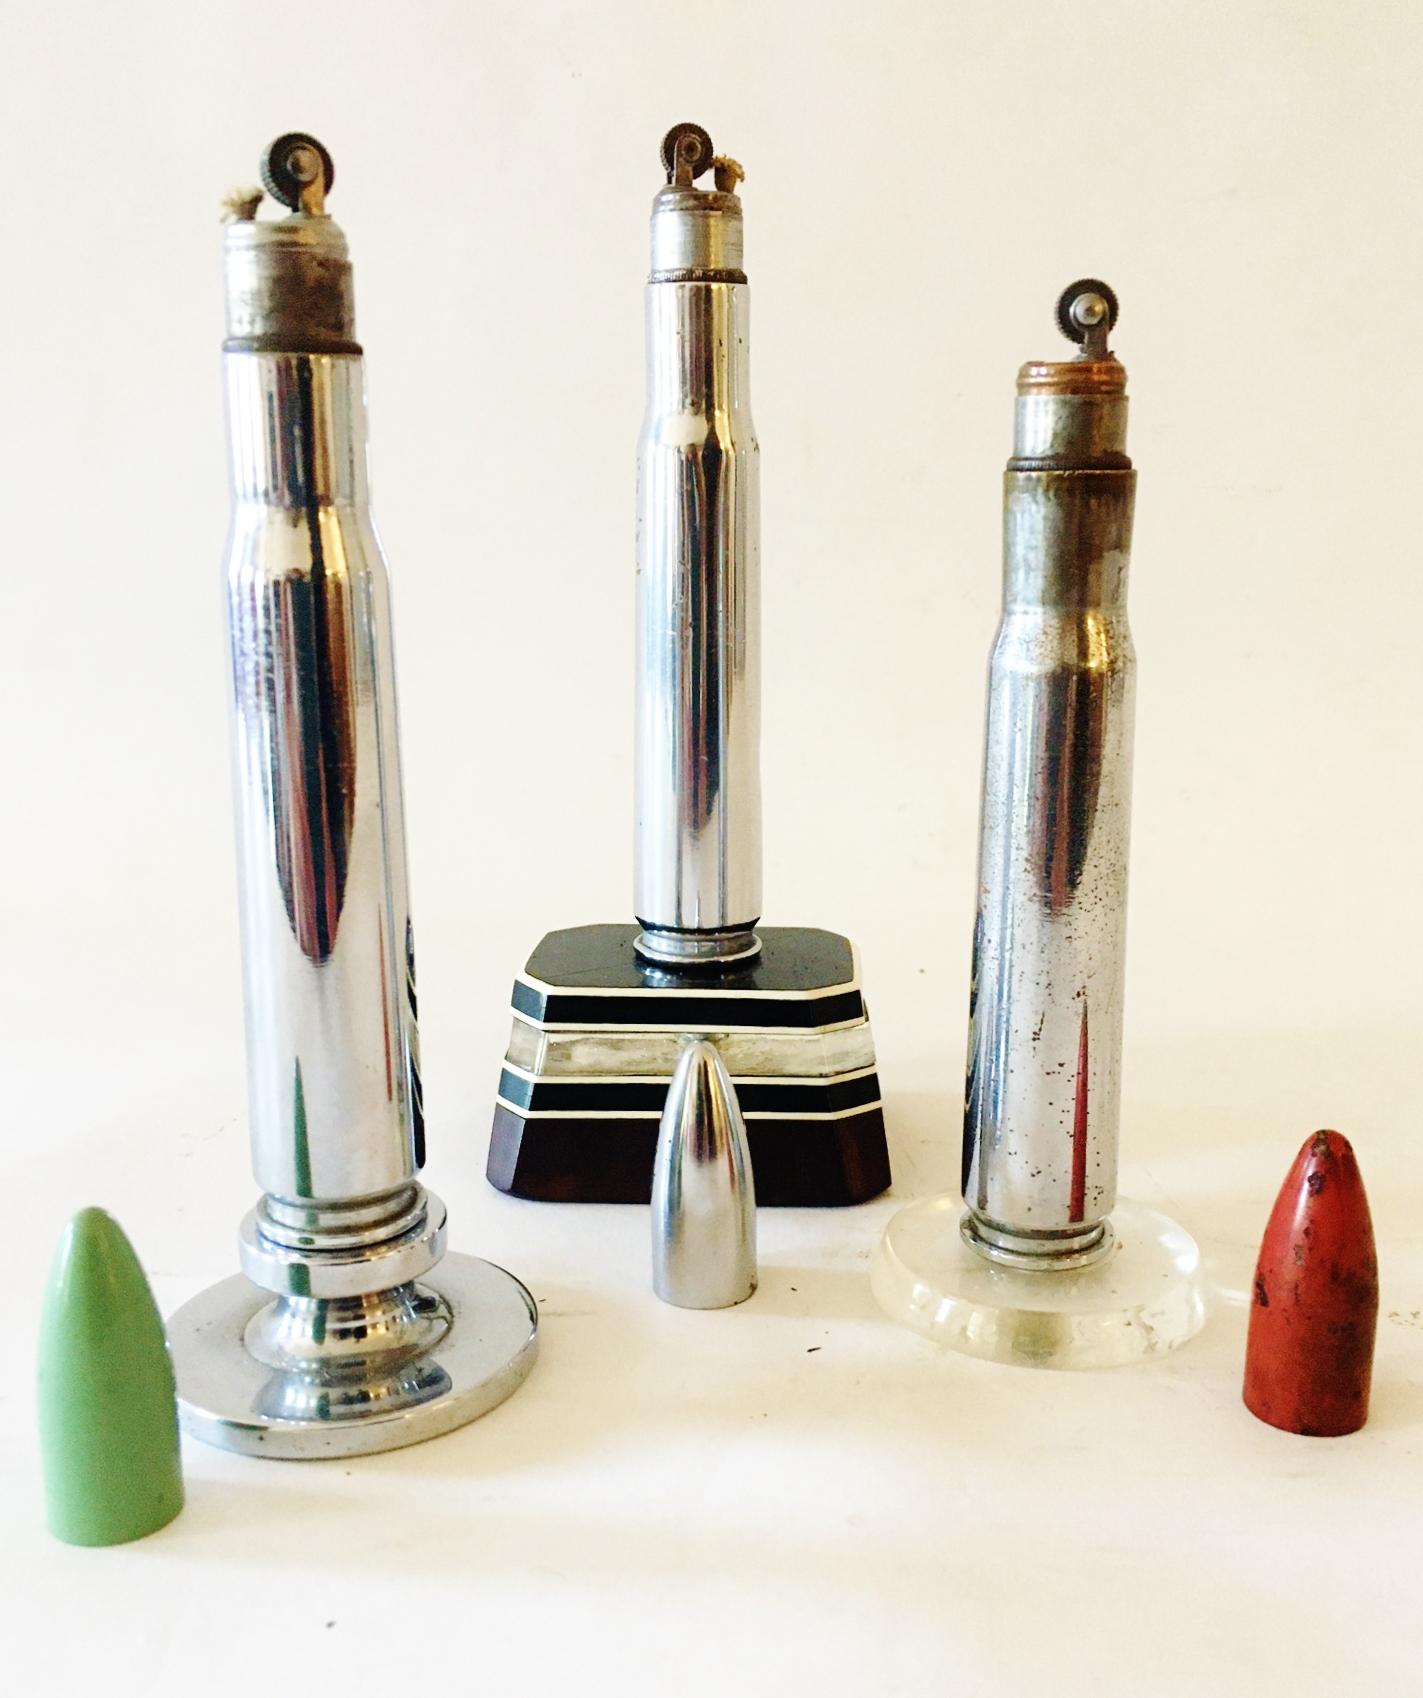 This group of 3 American Art Deco, Trench Art, wheel and flint table lighters feature chrome bodies mounted on different bases and with different colored 